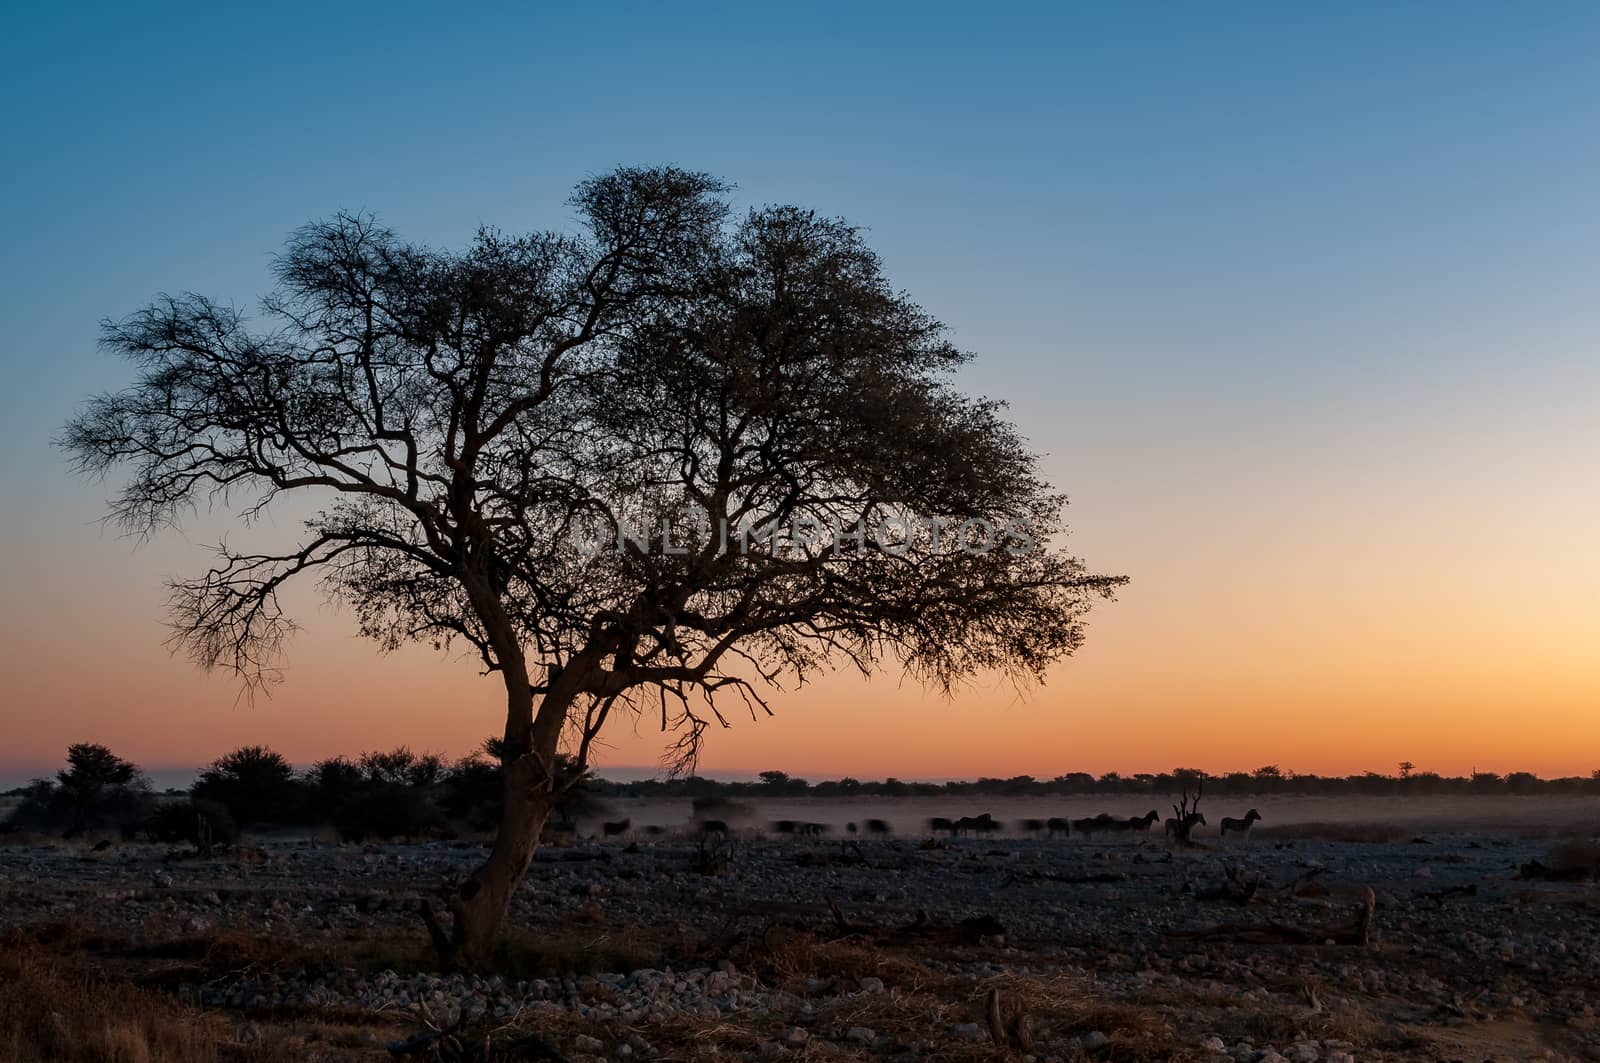 Silhouettes of Burchells zebras walking past a large tree at sunset in northern Namibia